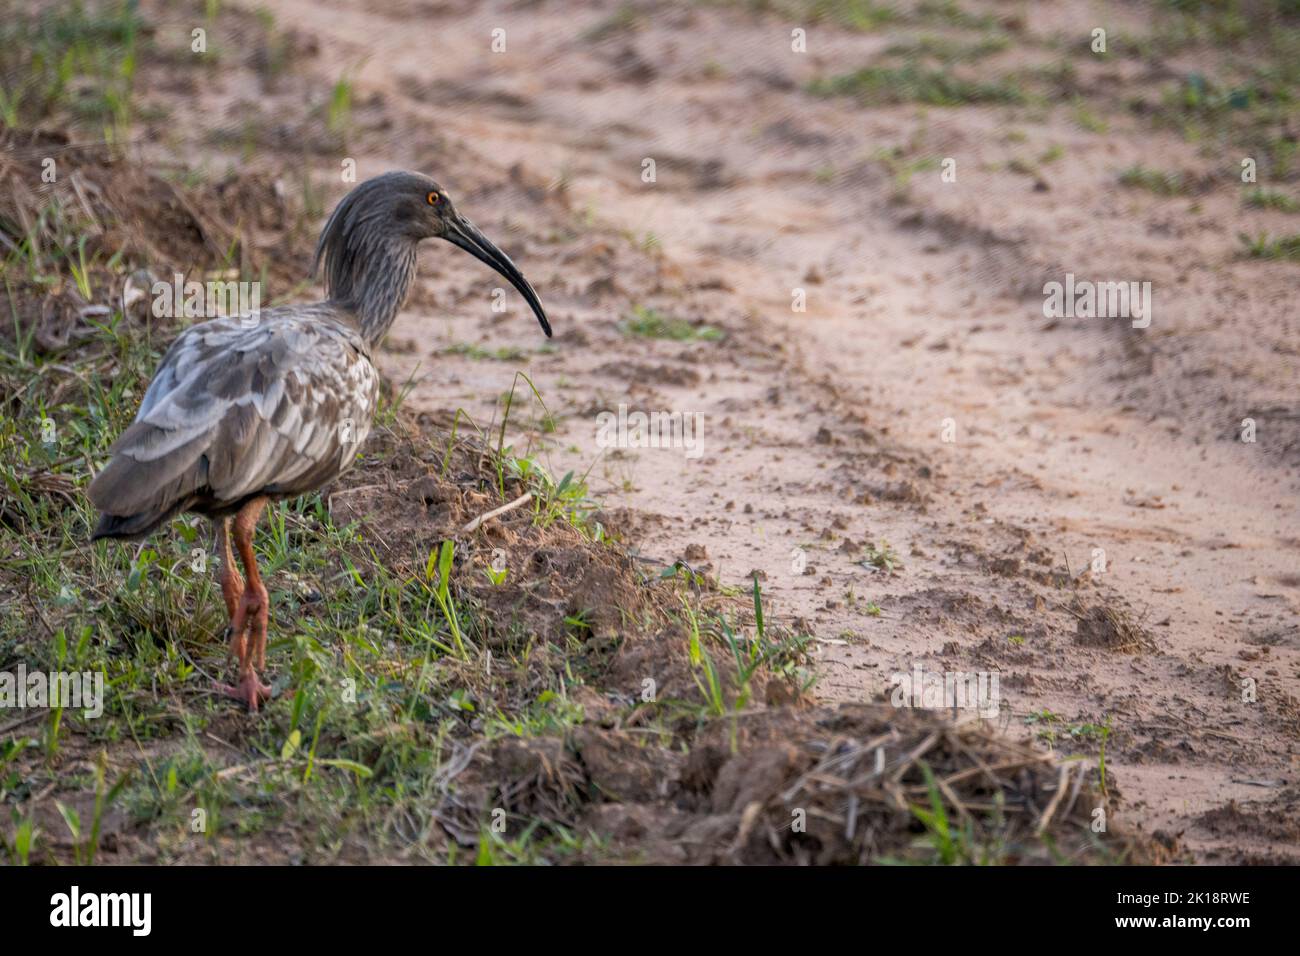 A Plumbeous Ibis (Theristicus caerulescens) near the Piuval Lodge in the Northern Pantanal, State of Mato Grosso, Brazil. Stock Photo